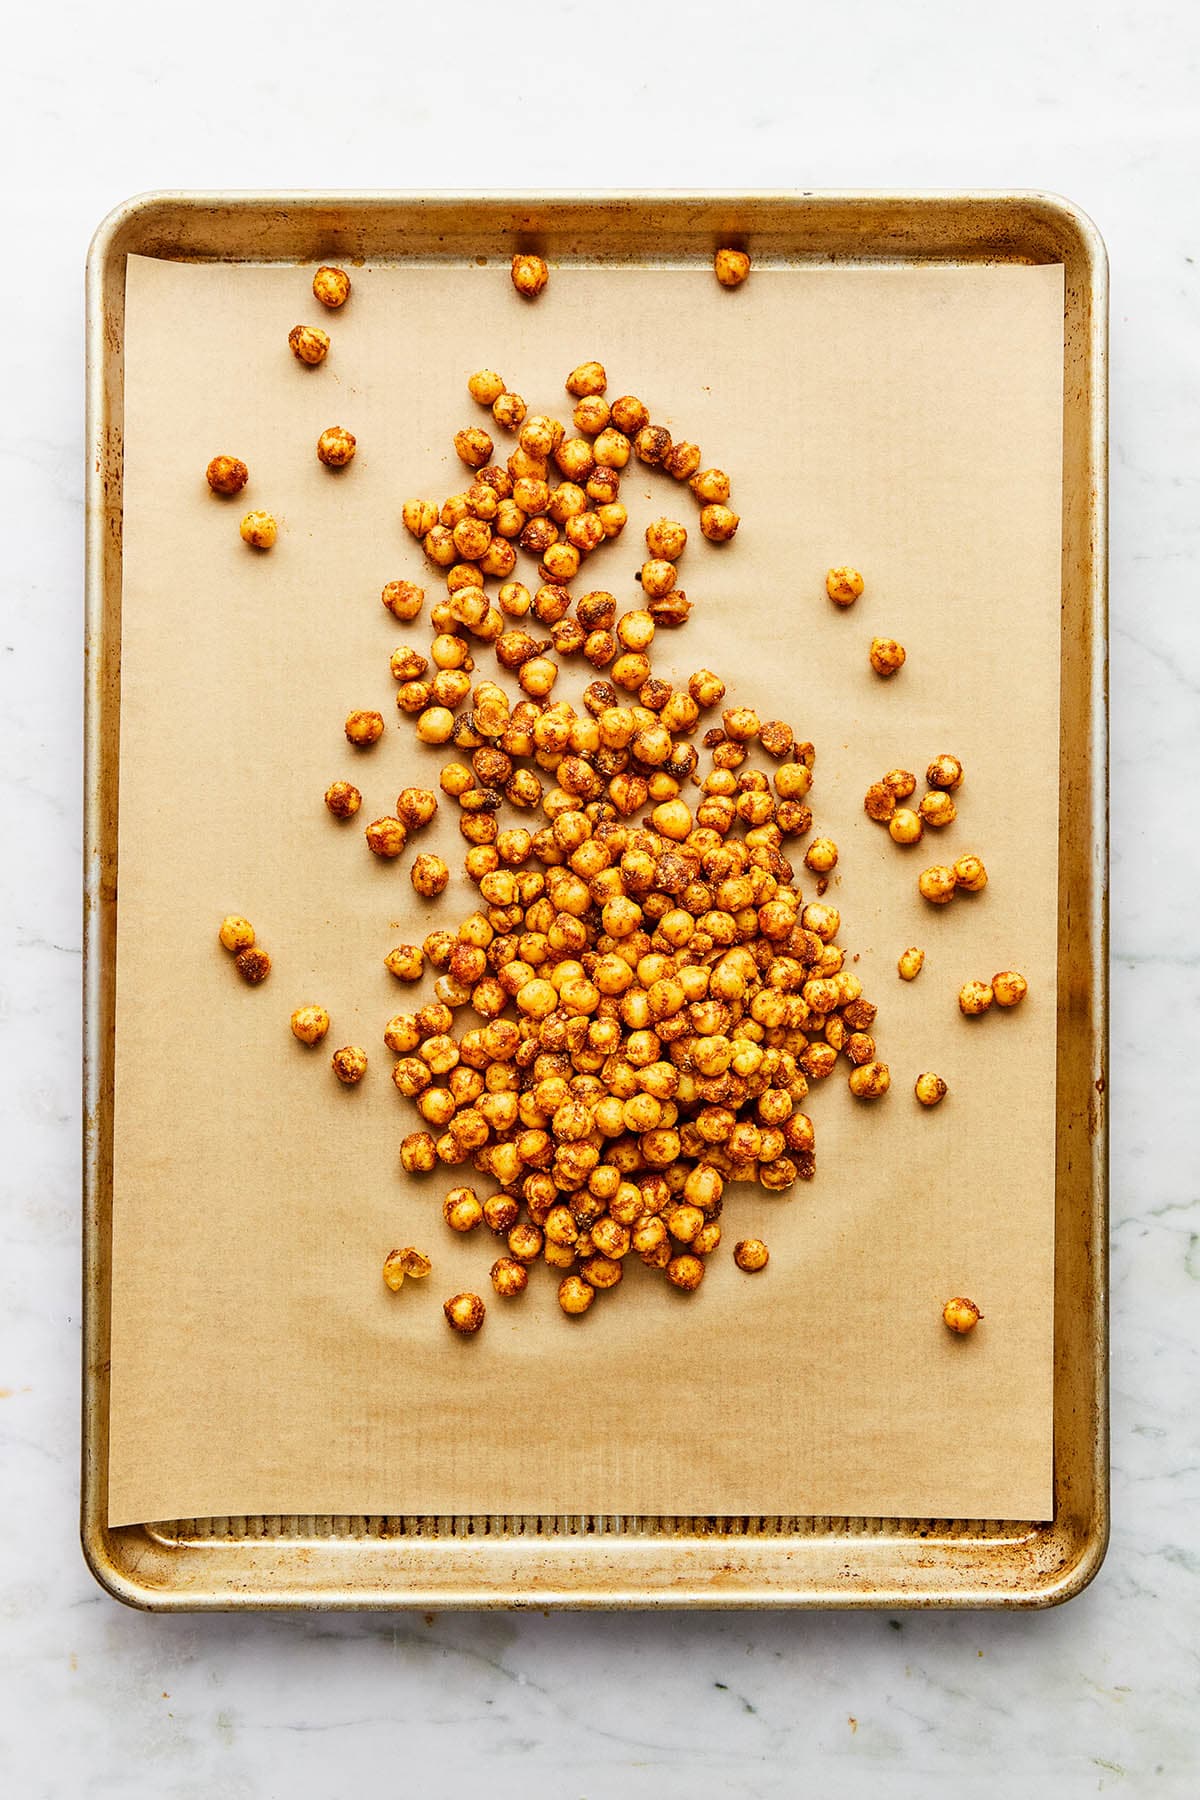 A small pile of spiced uncooked chickpeas on a baking sheet with parchment paper.